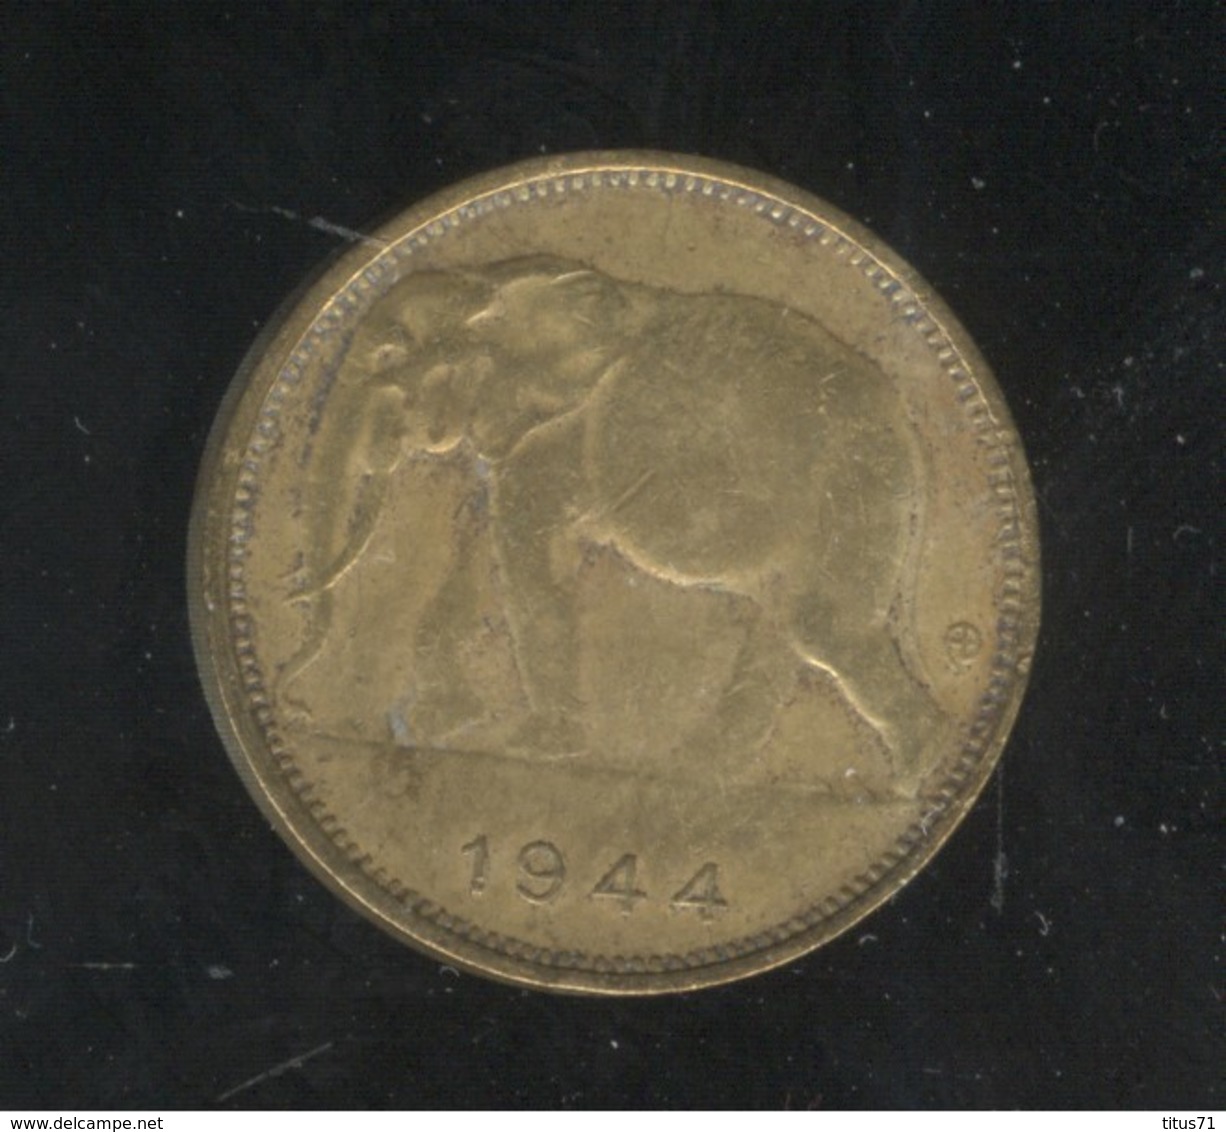 1 Franc Congo Belge 1944 - Other - Africa